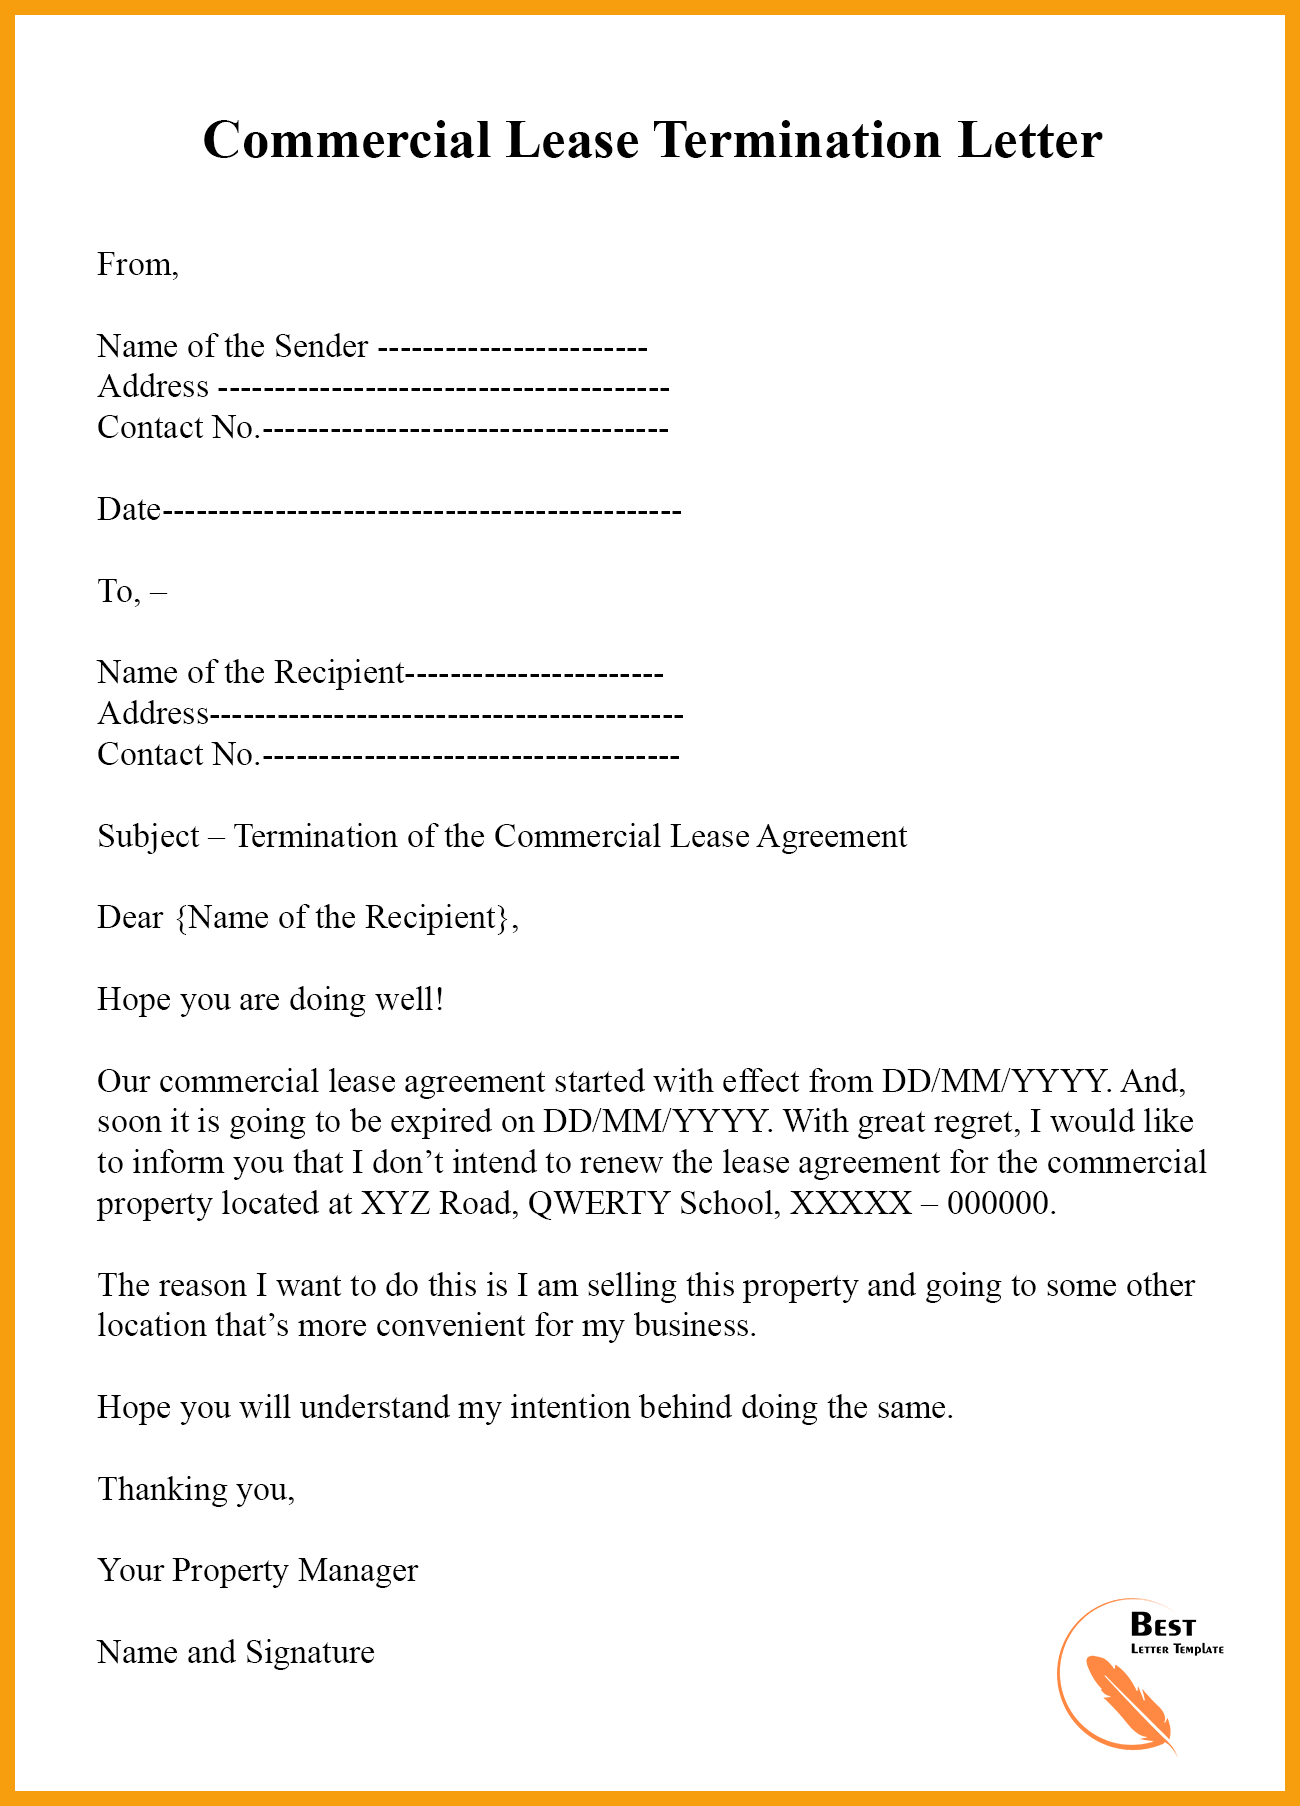 Landlord Month To Month Lease Termination Letter from bestlettertemplate.com